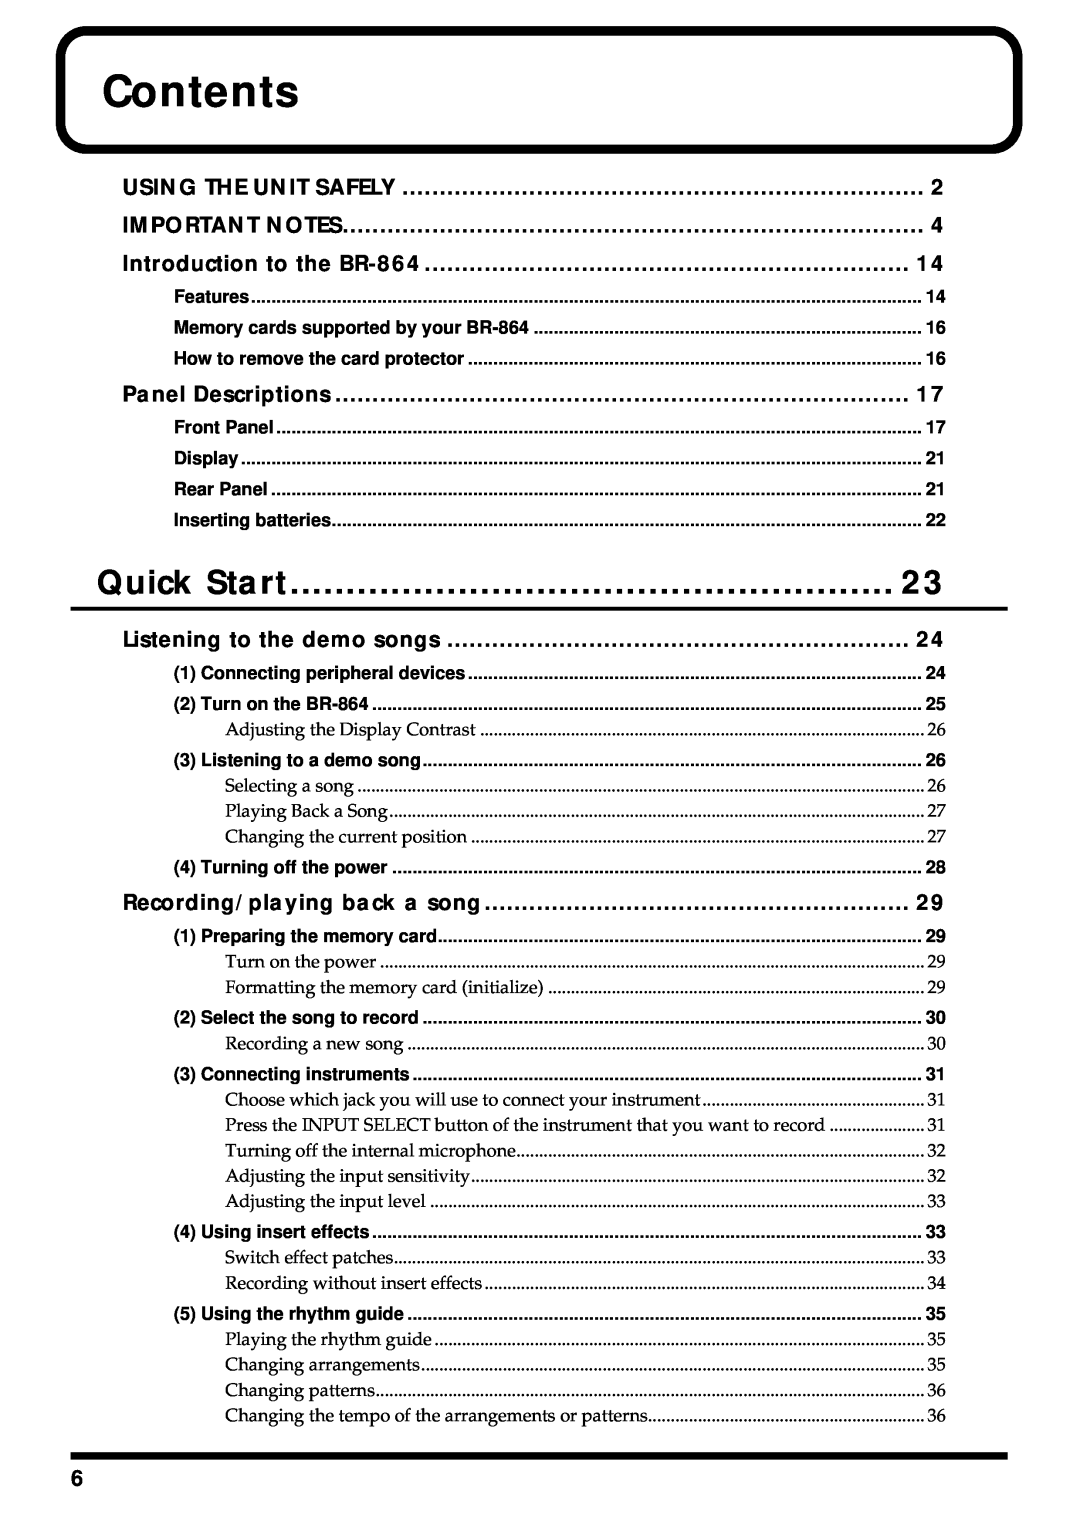 Roland BR-864 owner manual Contents, Quick Start 